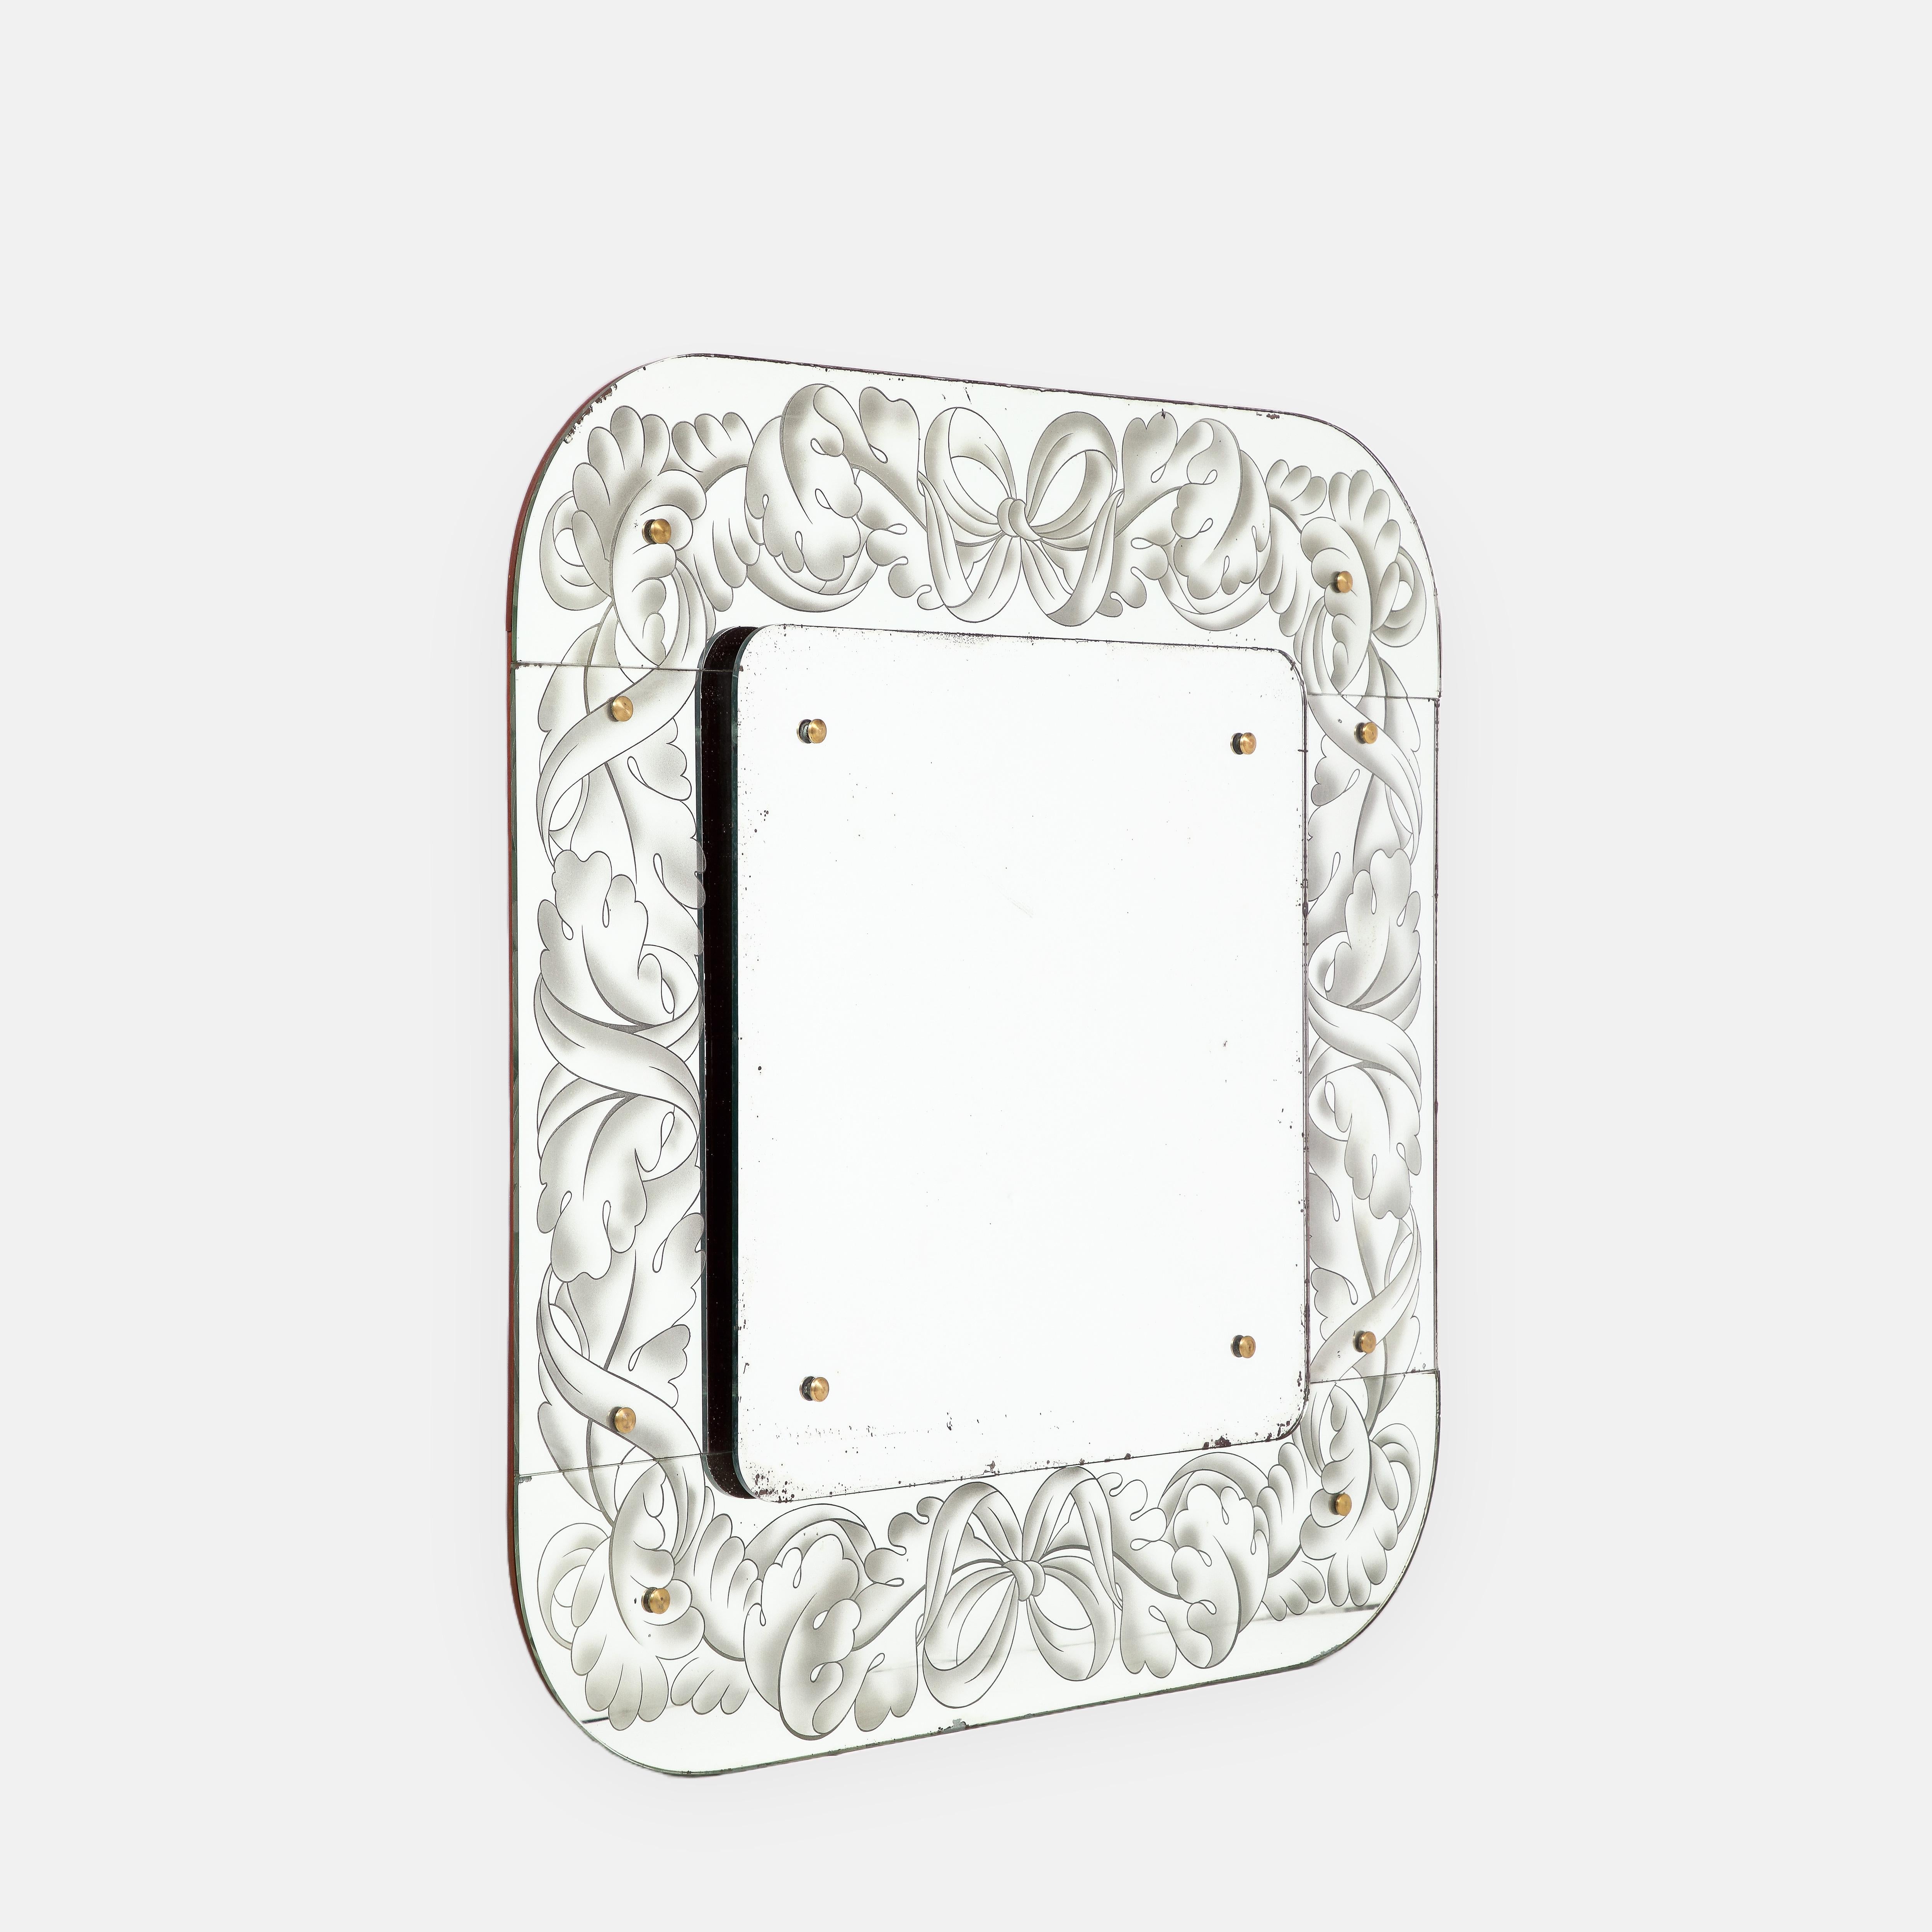 Giovanni Gariboldi rare original square etched glass wall mirror with rounded corners, Italy, 1940s.  This exquisite intricately etched mirror is comprised of 2 assembled mirrored glass parts - the central square mirror is mounted on the larger